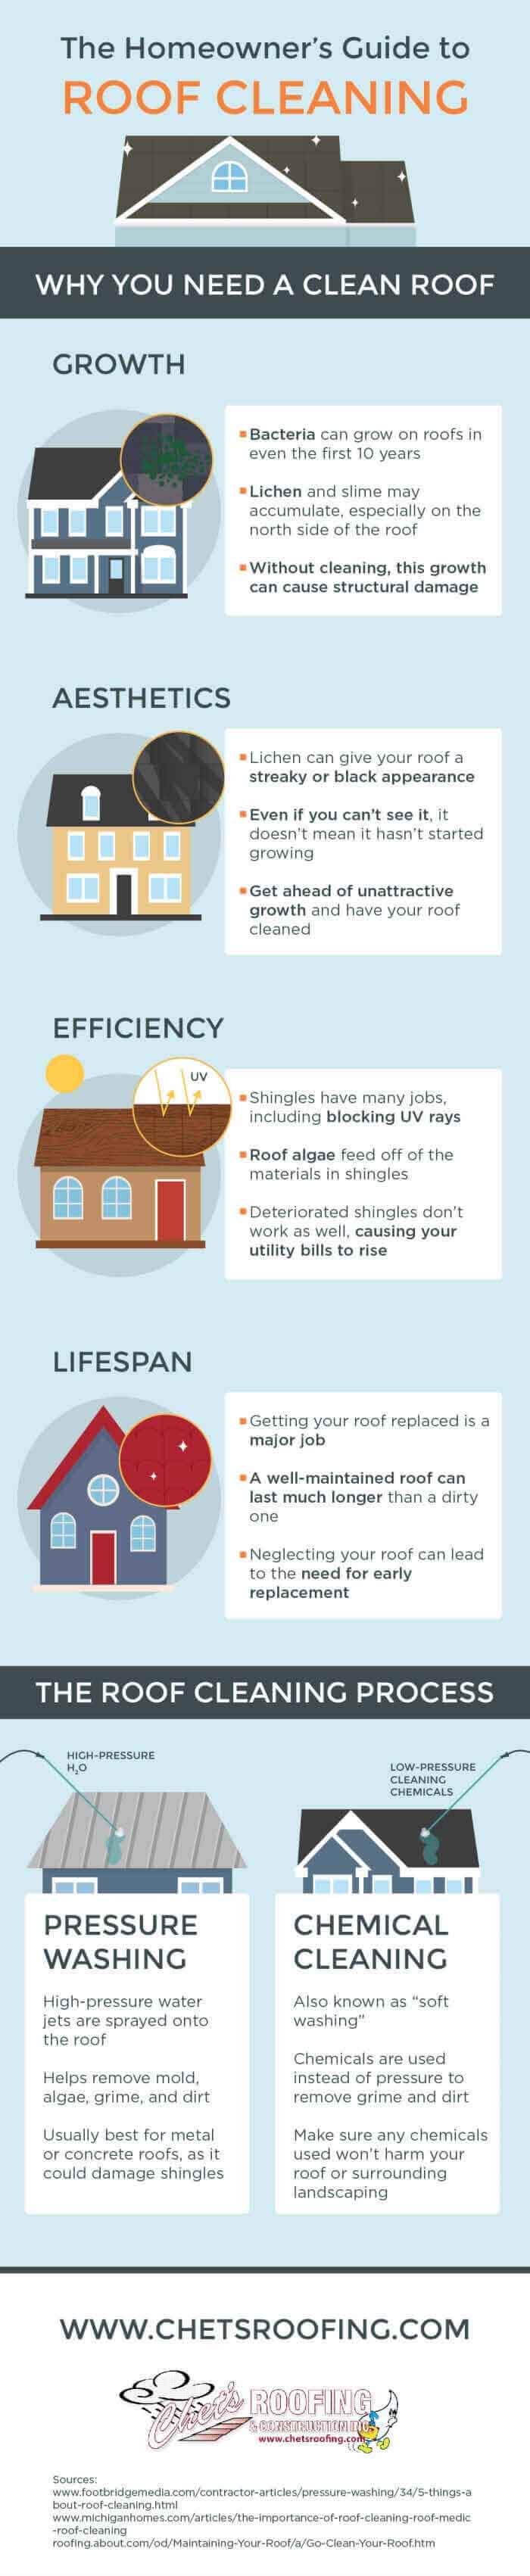 The Homeowners Guide to Roof Cleaning Infographic